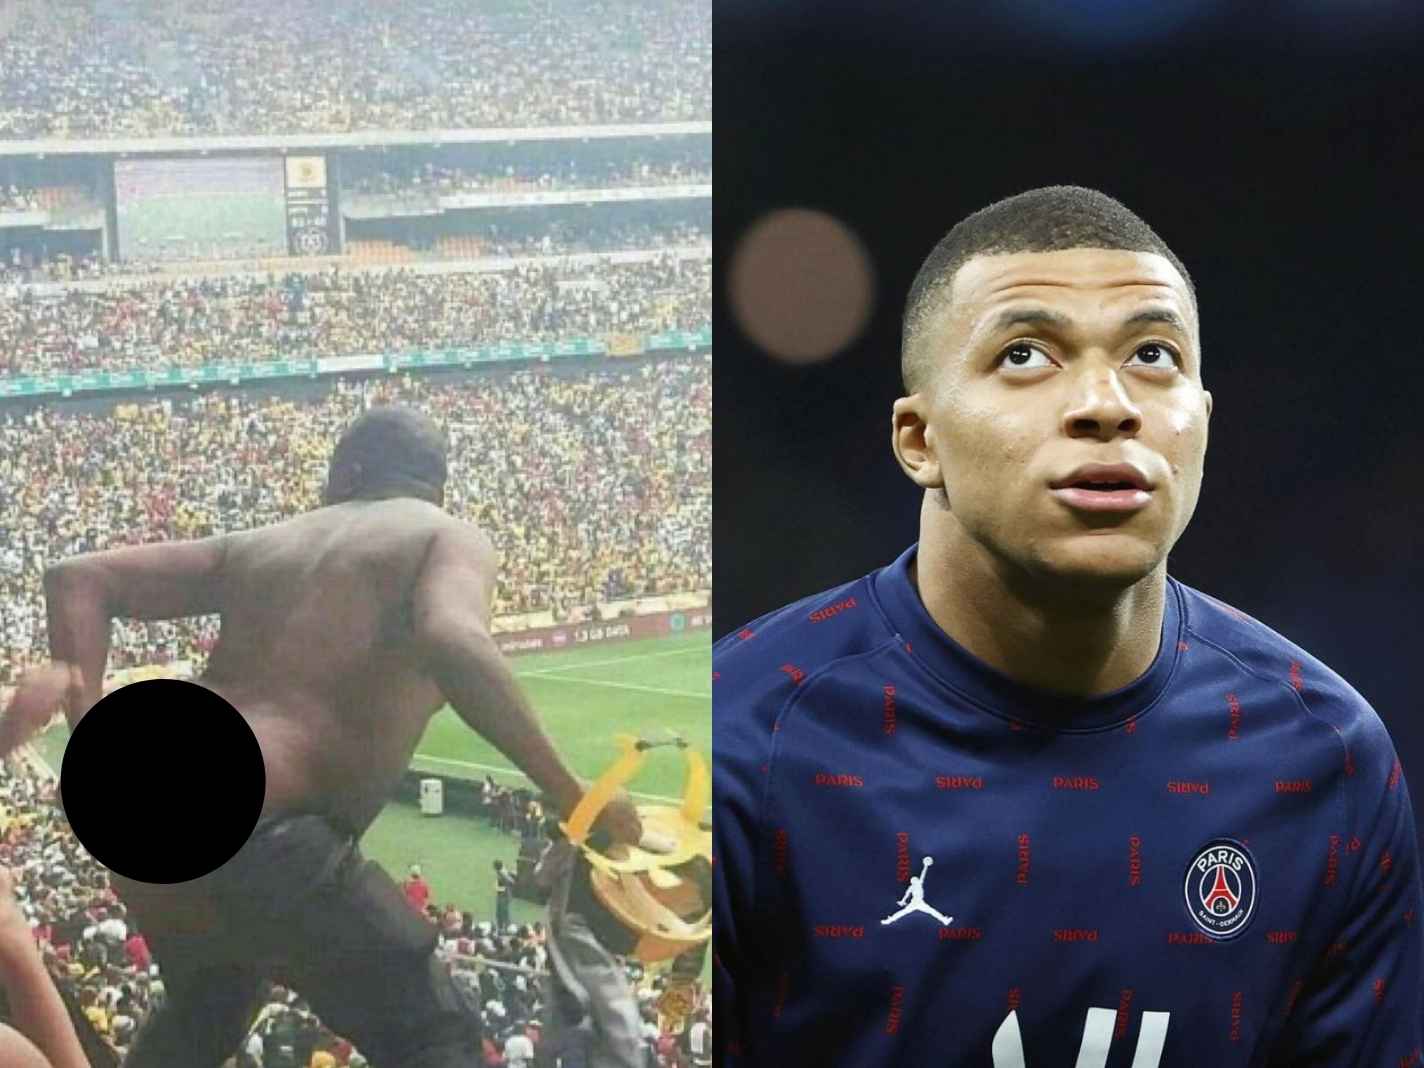 Kylian Mbappe Calls Out Winamax For Offensive Tweet About His Father